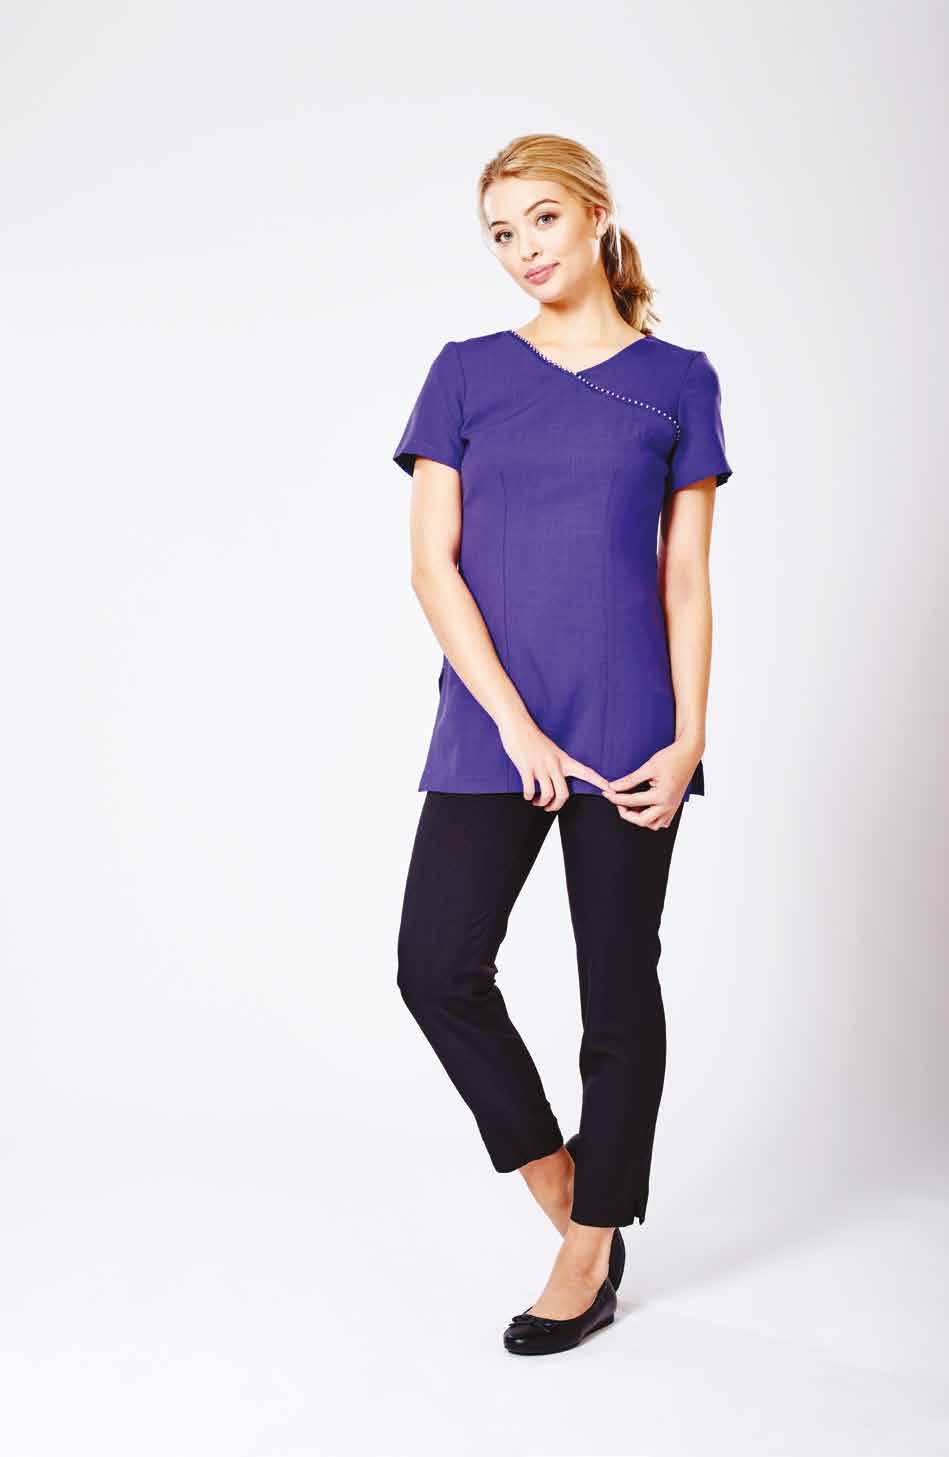 ALICE Brighten up your workwear with this tunic featuring splashes of